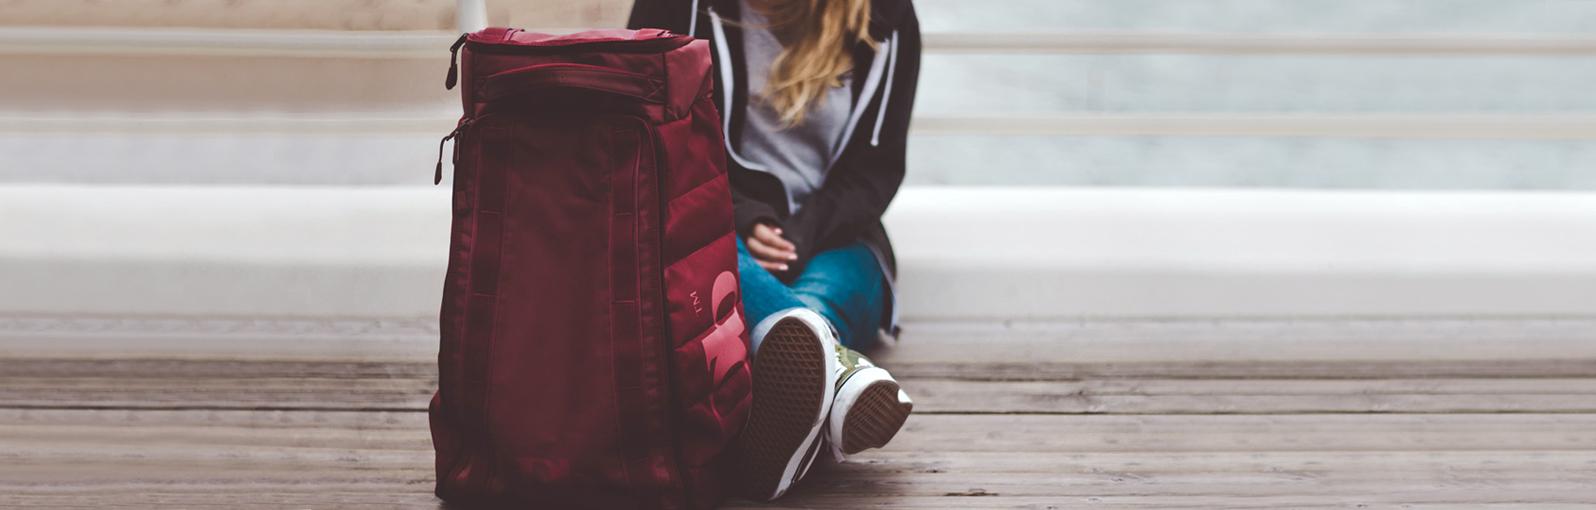 Woman sat with a red rucksack on a wooden floor